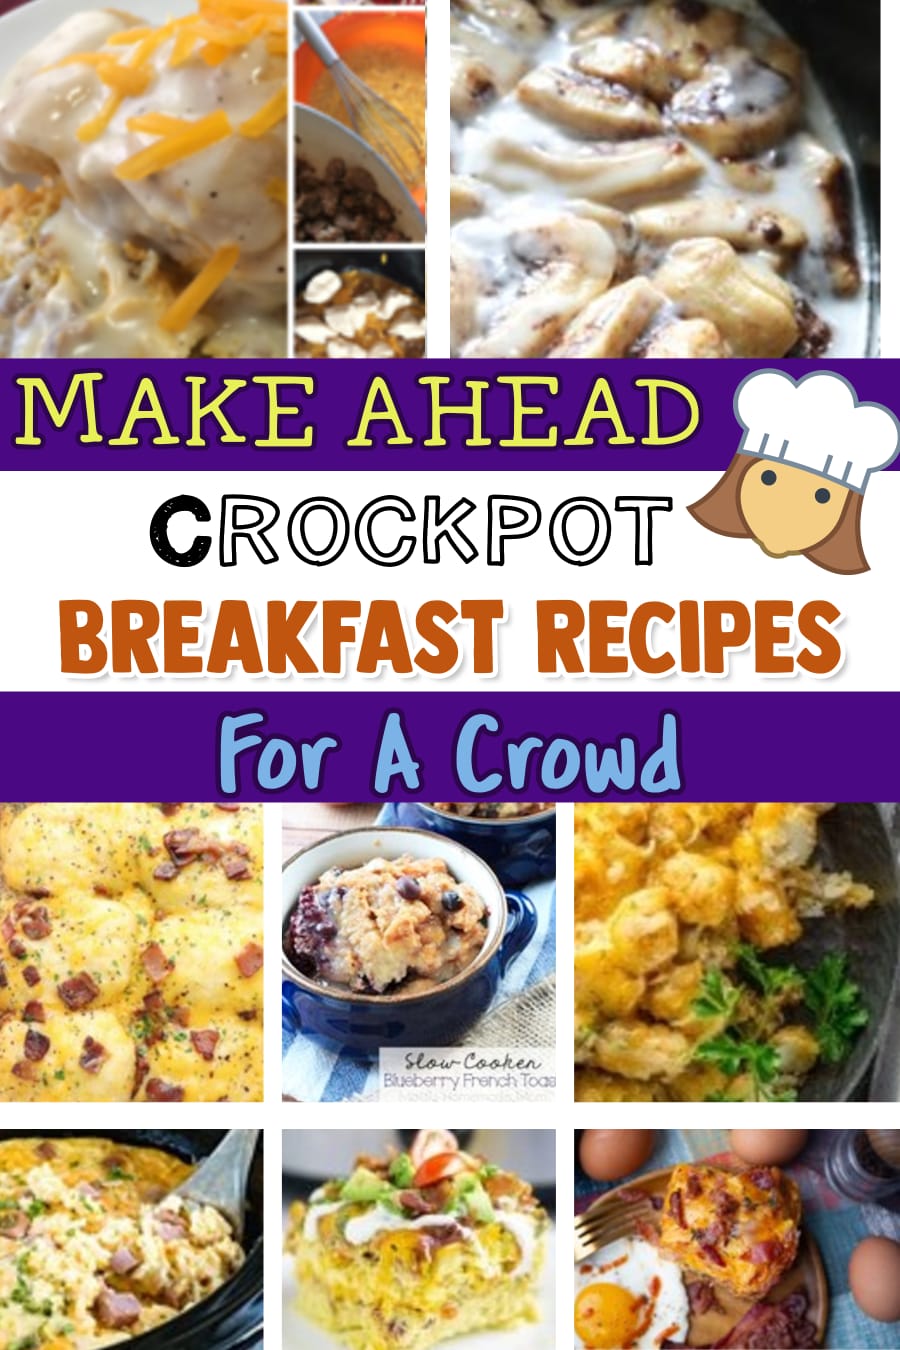 Overnight breakfast ideas for a crowd! These crockpot breakfast recipes are easy make ahead breakfast ideas for a crowd.  Most popular overnight crockpot breakfast casseroles with sweet cinnamon buns and French toast, healthy low carb breakfast casseroles (for eating Keto), eggs, cheese, bacon, ham, sausage, hashbrowns potatoes and tater tots - even biscuits and gravy overnight breakfast casserole ideas cooked in slow cooker crock pots.  Lots of breakfast casserole recipes to make...